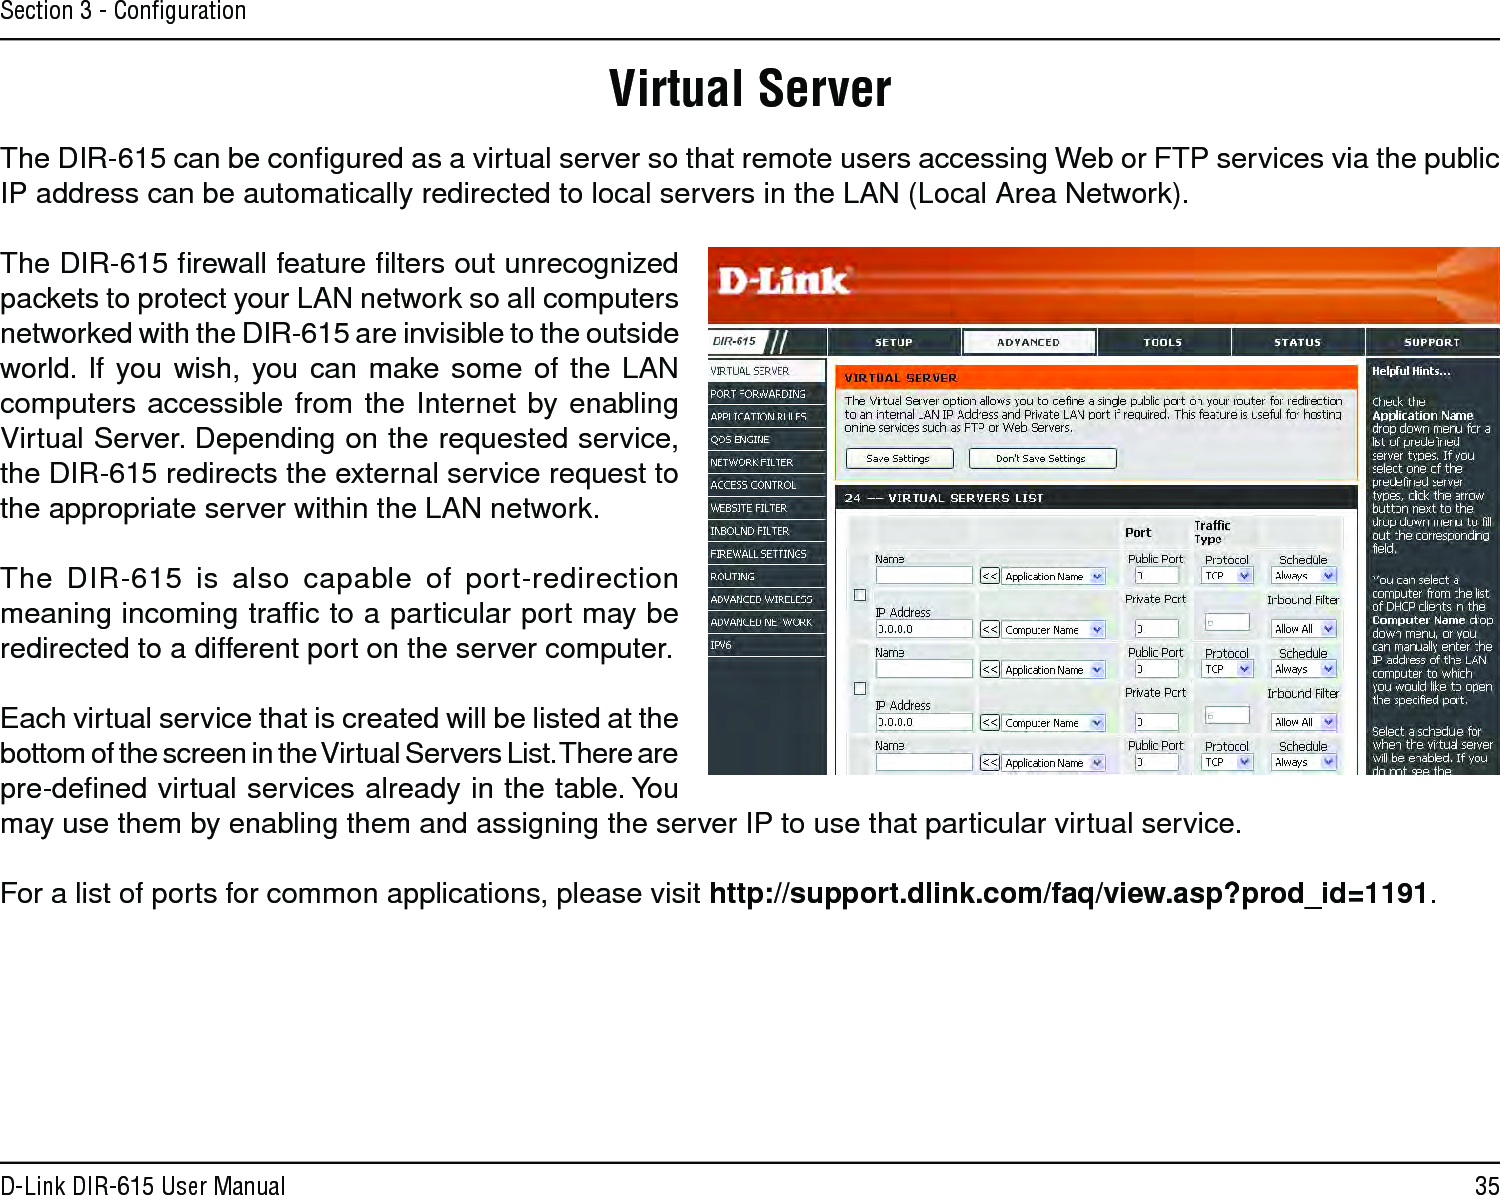 35D-Link DIR-615 User ManualSection 3 - ConﬁgurationThe DIR-615 can be conﬁgured as a virtual server so that remote users accessing Web or FTP services via the public IP address can be automatically redirected to local servers in the LAN (Local Area Network). The DIR-615 ﬁrewall feature ﬁlters out unrecognized packets to protect your LAN network so all computers networked with the DIR-615 are invisible to the outside world.  If  you wish, you  can  make some  of  the  LAN computers accessible  from the Internet  by enabling Virtual Server. Depending on the requested service, the DIR-615 redirects the external service request to the appropriate server within the LAN network. The  DIR-615  is  also  capable  of  port-redirection meaning incoming trafﬁc to a particular port may be redirected to a different port on the server computer.Each virtual service that is created will be listed at the bottom of the screen in the Virtual Servers List. There are  pre-deﬁned virtual services already in the table. You may use them by enabling them and assigning the server IP to use that particular virtual service.For a list of ports for common applications, please visit http://support.dlink.com/faq/view.asp?prod_id=1191.Virtual Server